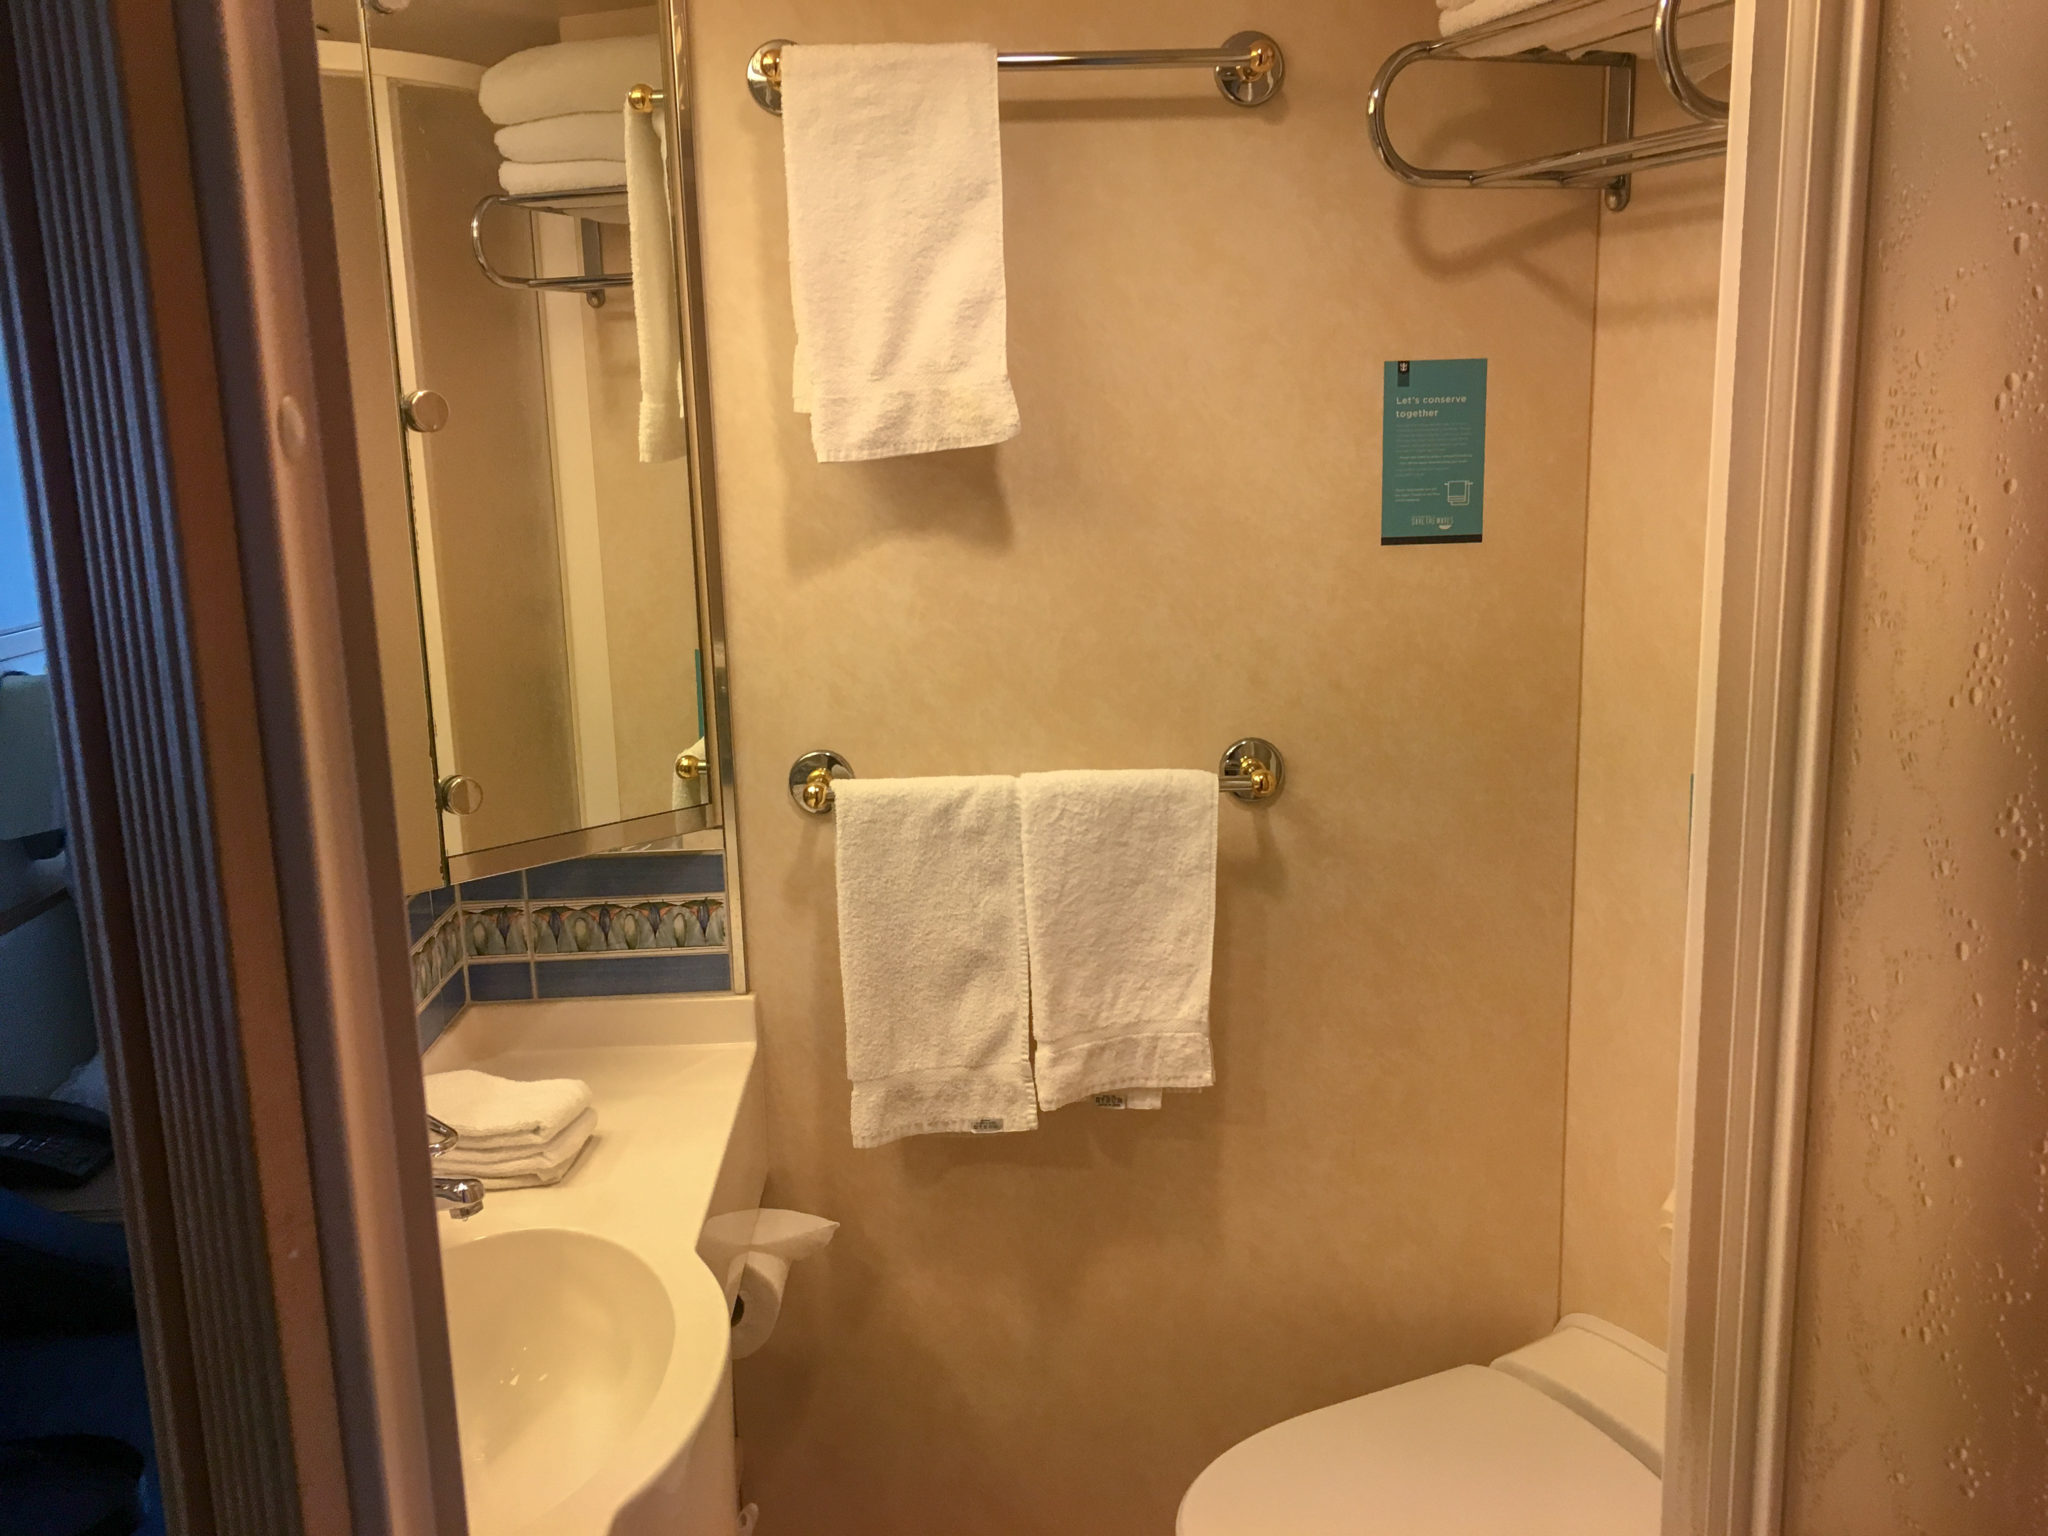 Cruise ship stateroom bathroom with shower, toilet, basin and three handtowels